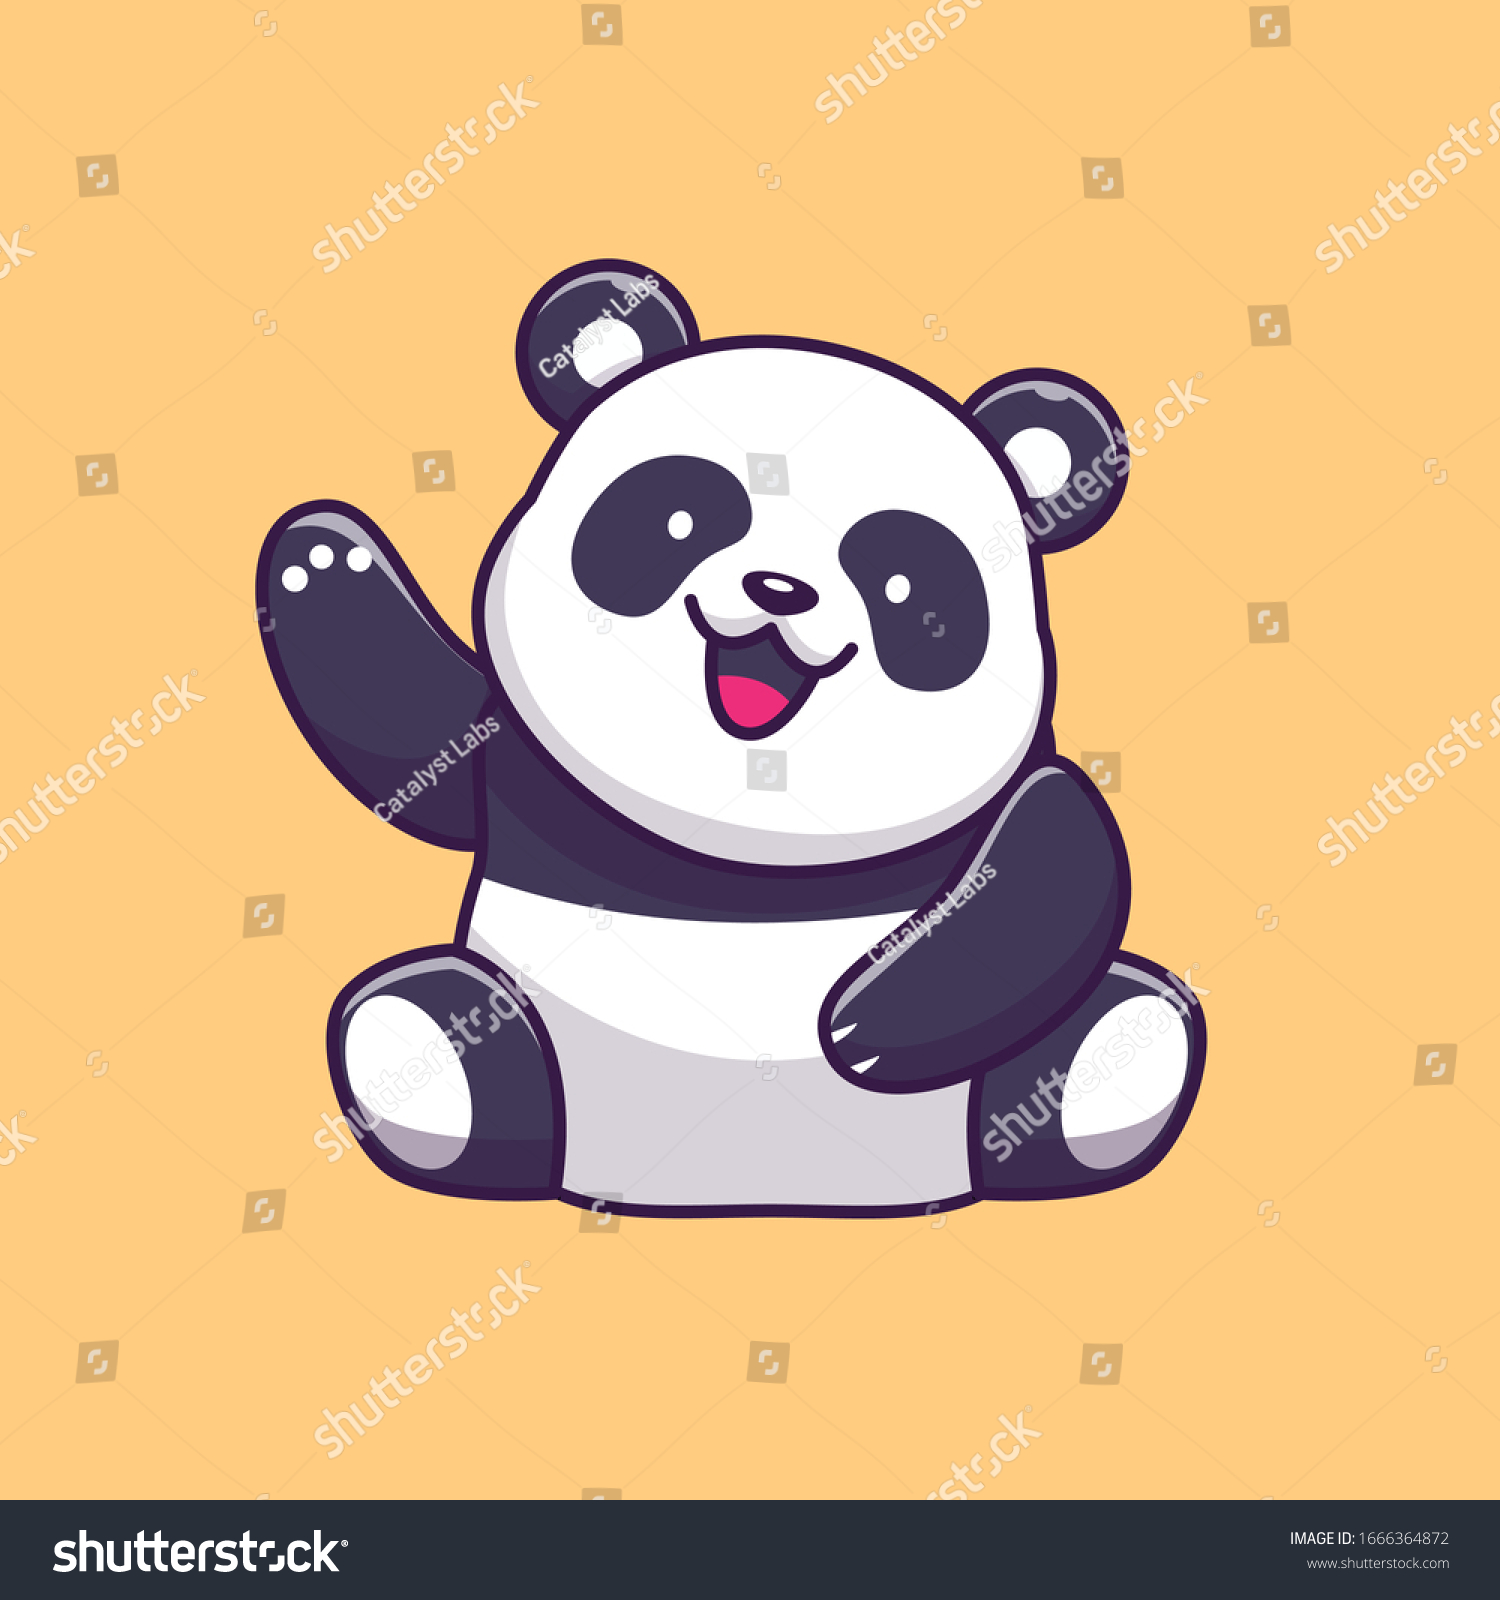 SVG of Cute Panda Waving Hand Vector Icon Illustration. Panda Mascot Cartoon Character. Animal Icon Concept White Isolated. Flat Cartoon Style Suitable for Web Landing Page, Banner, Flyer, Sticker, Card svg